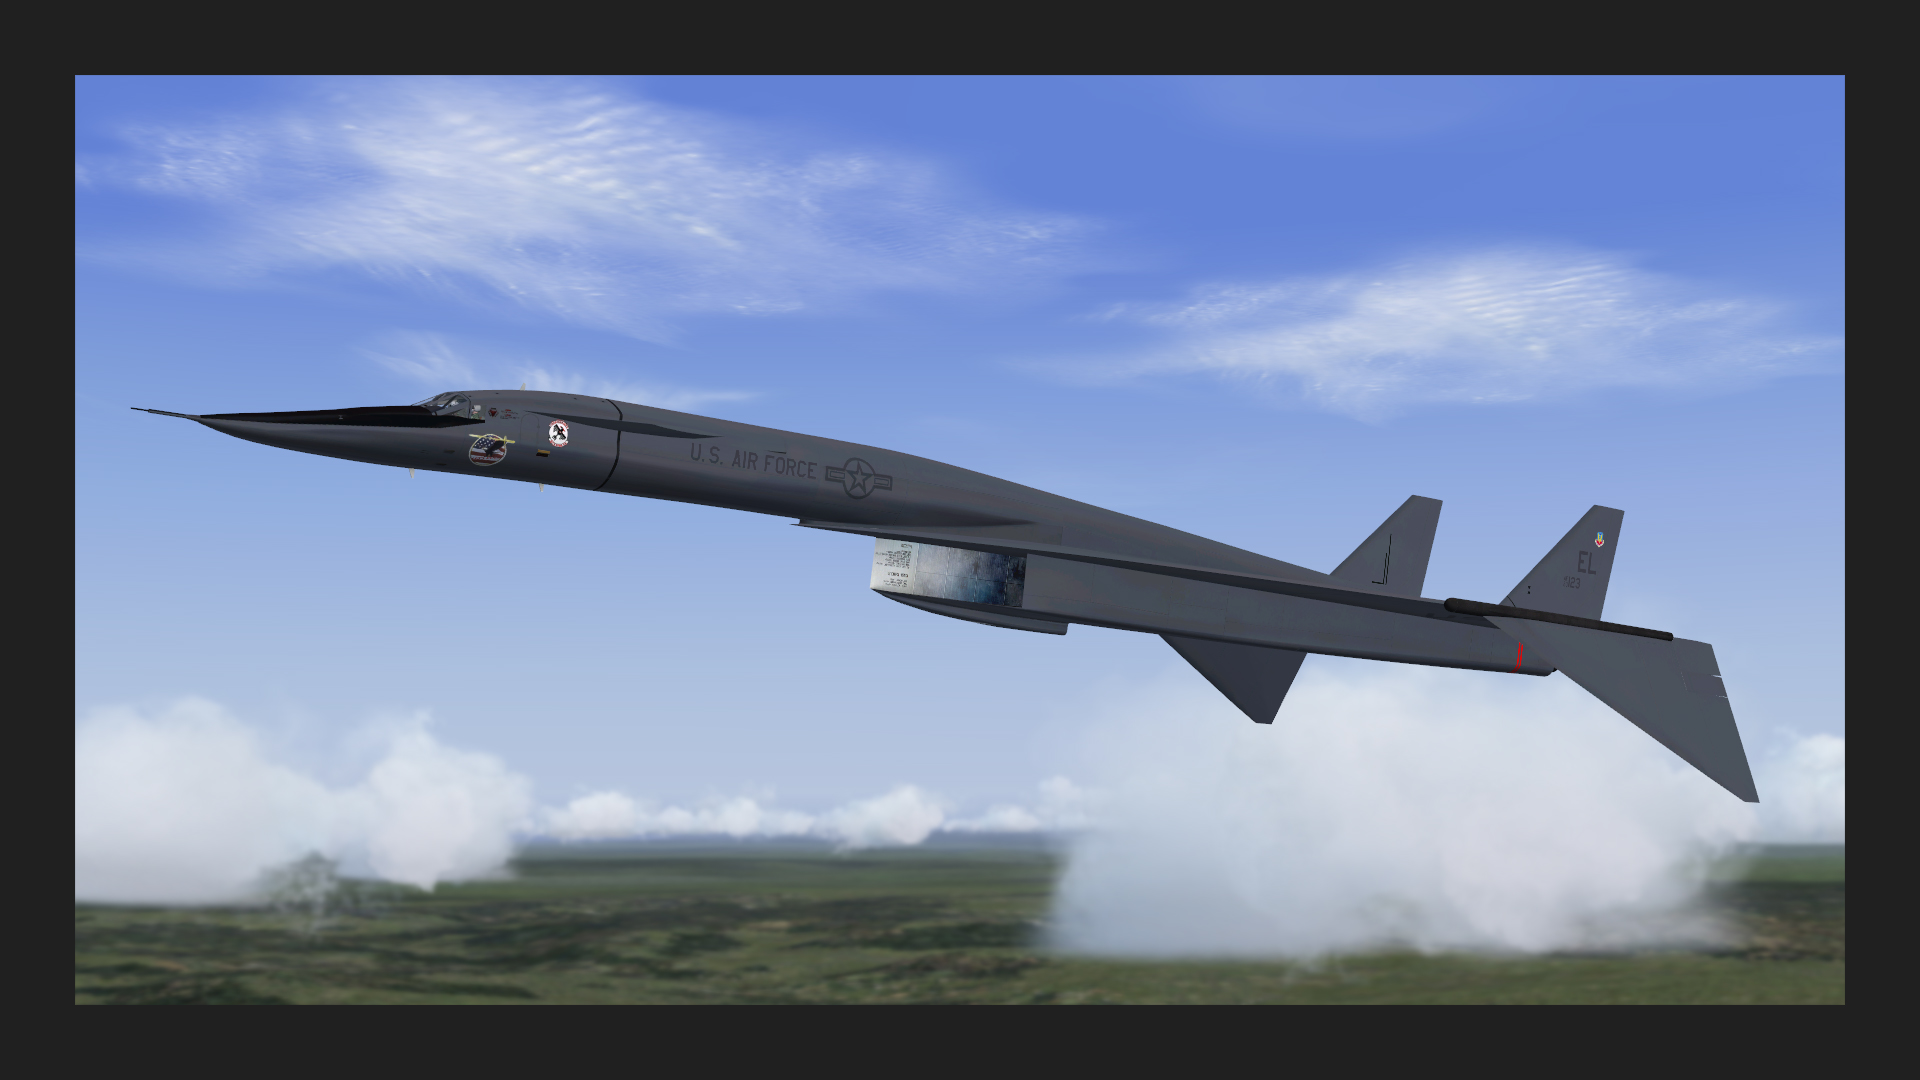 XB-70 Valkyrie by bagera3005 on DeviantArt